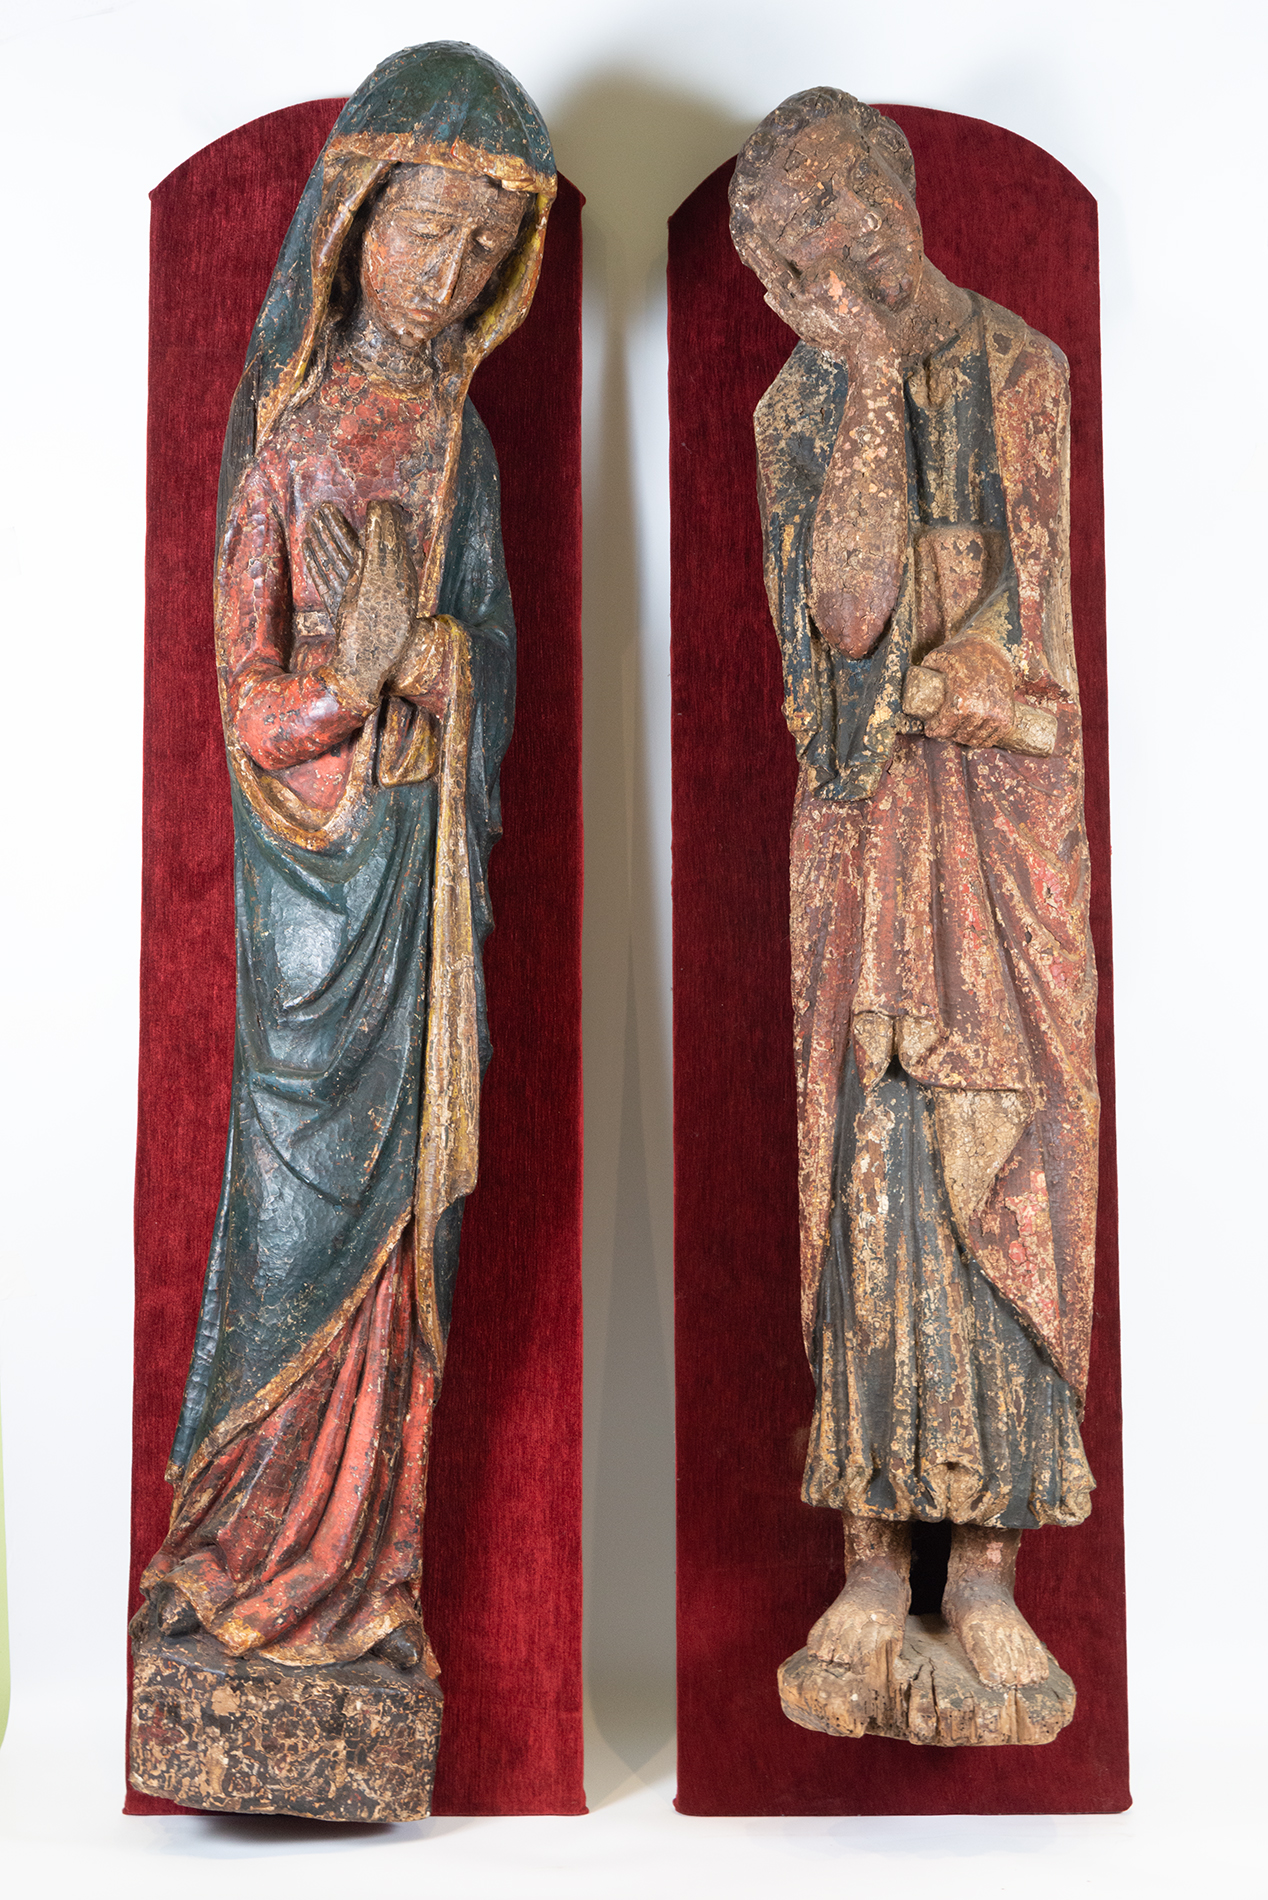 Pair of Large Romanesque Carvings representing Mary and Saint John the Evangelist, Romanesque School